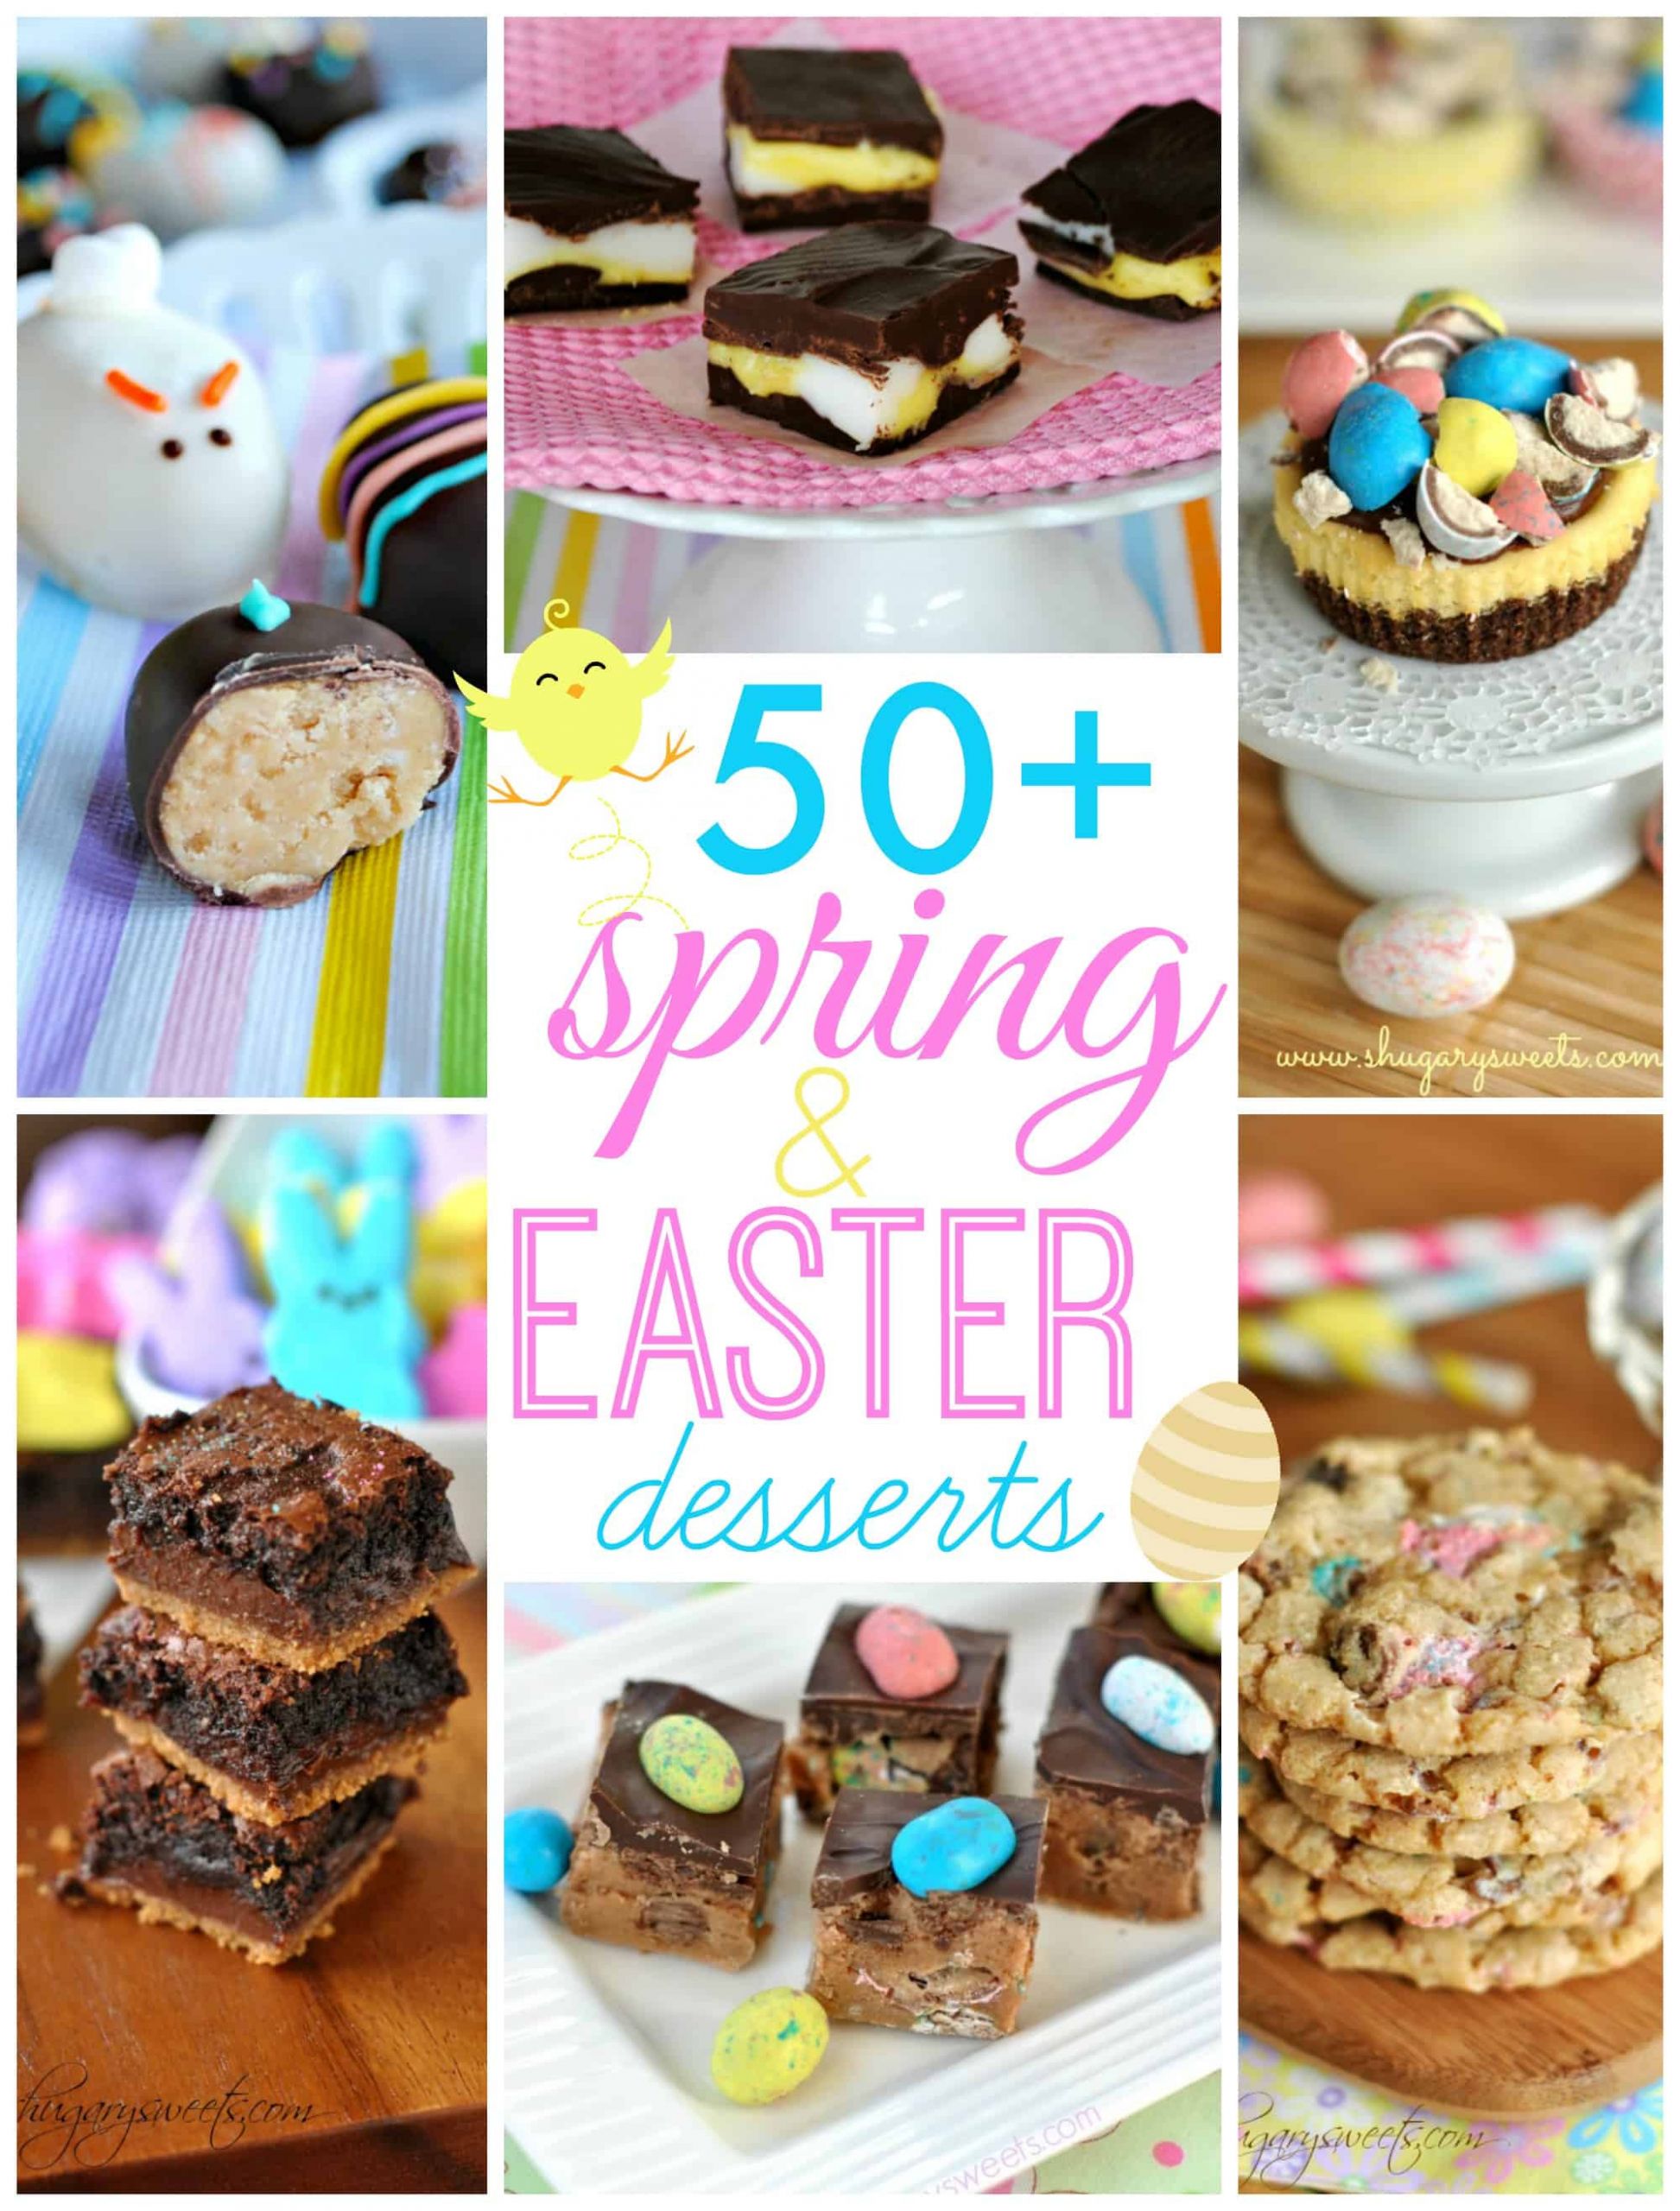 Recipes For Easter Desserts
 50 Easter Desserts Shugary Sweets